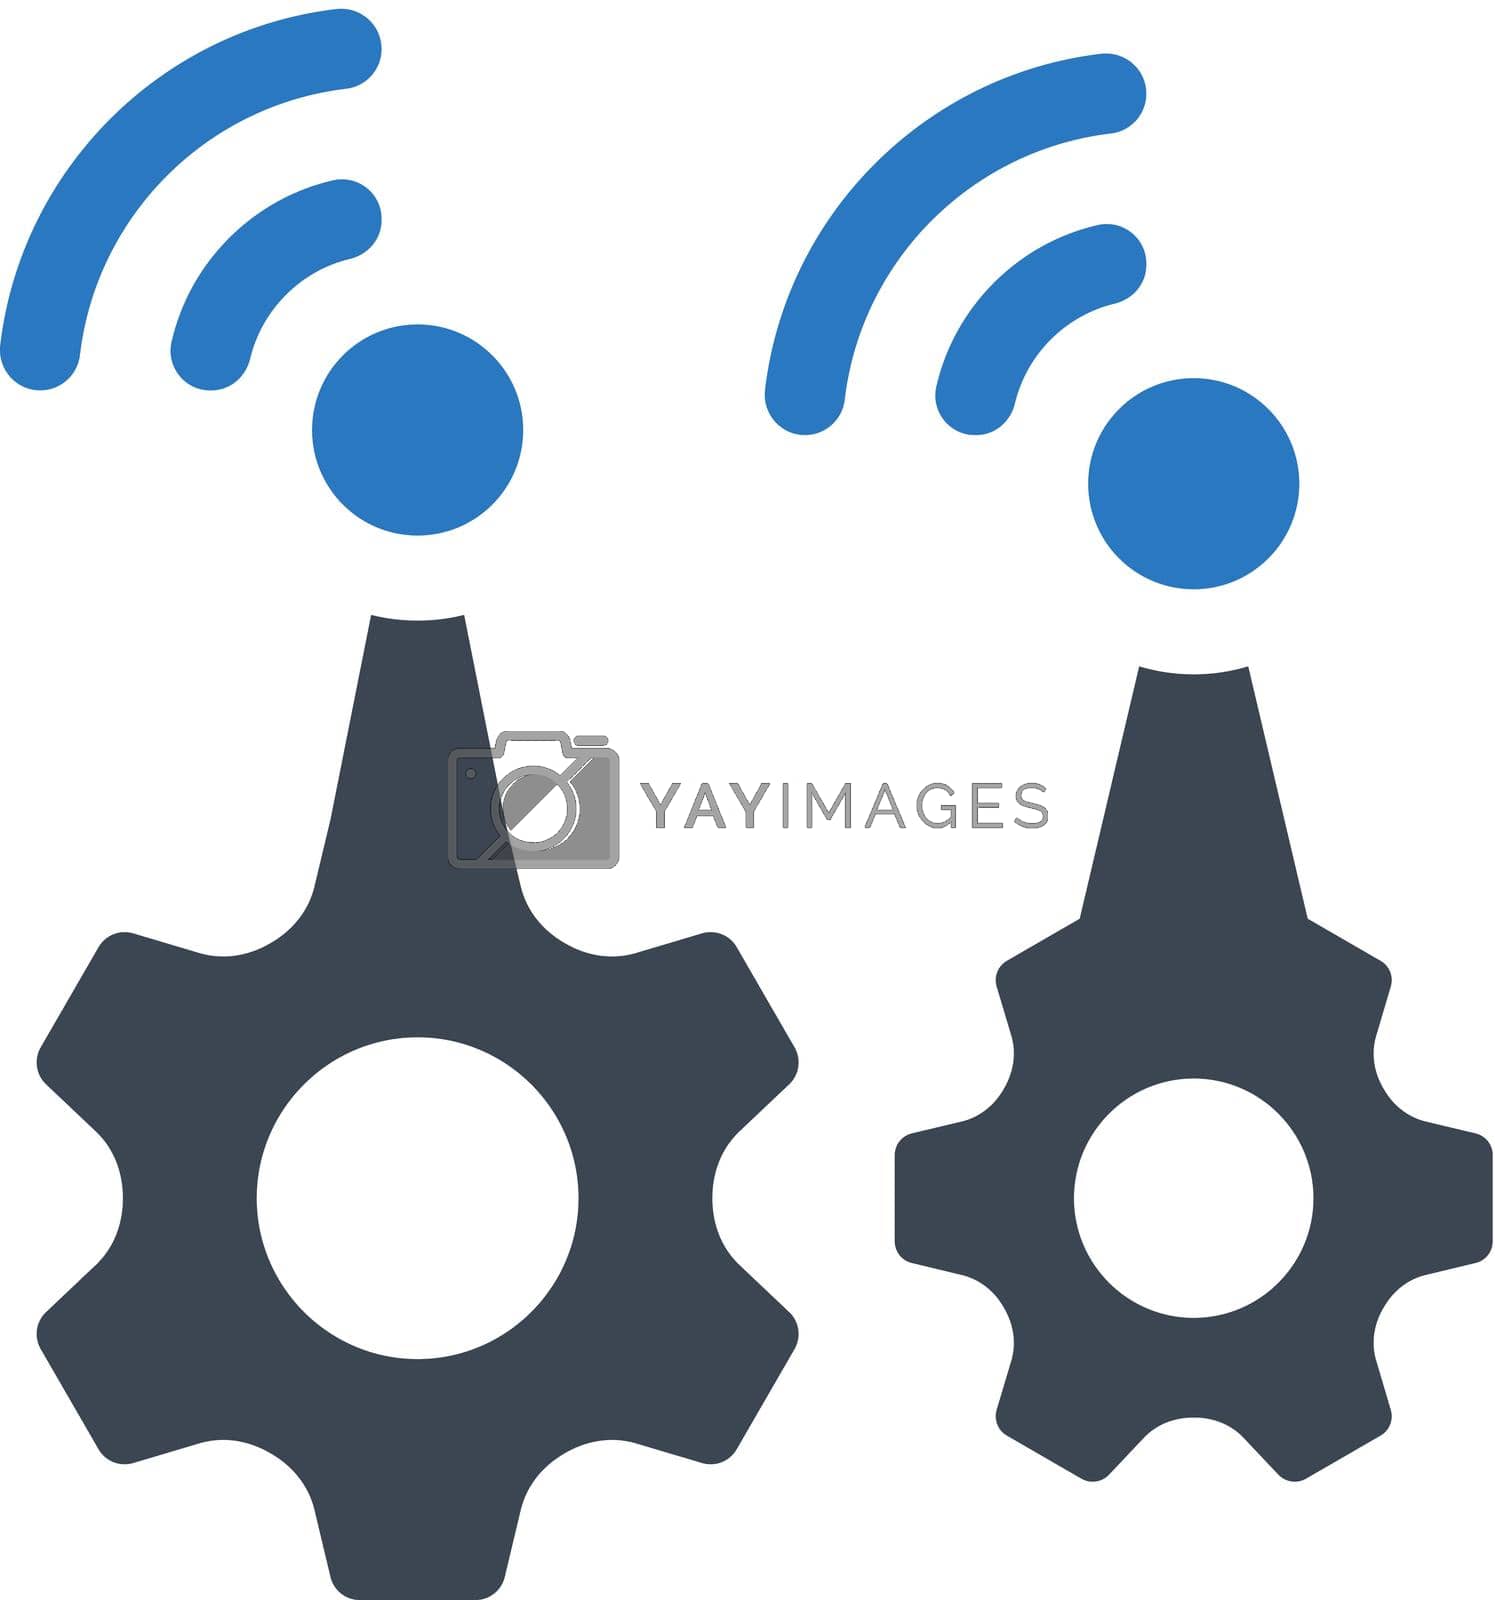 Royalty free image of Network service icon by delwar018